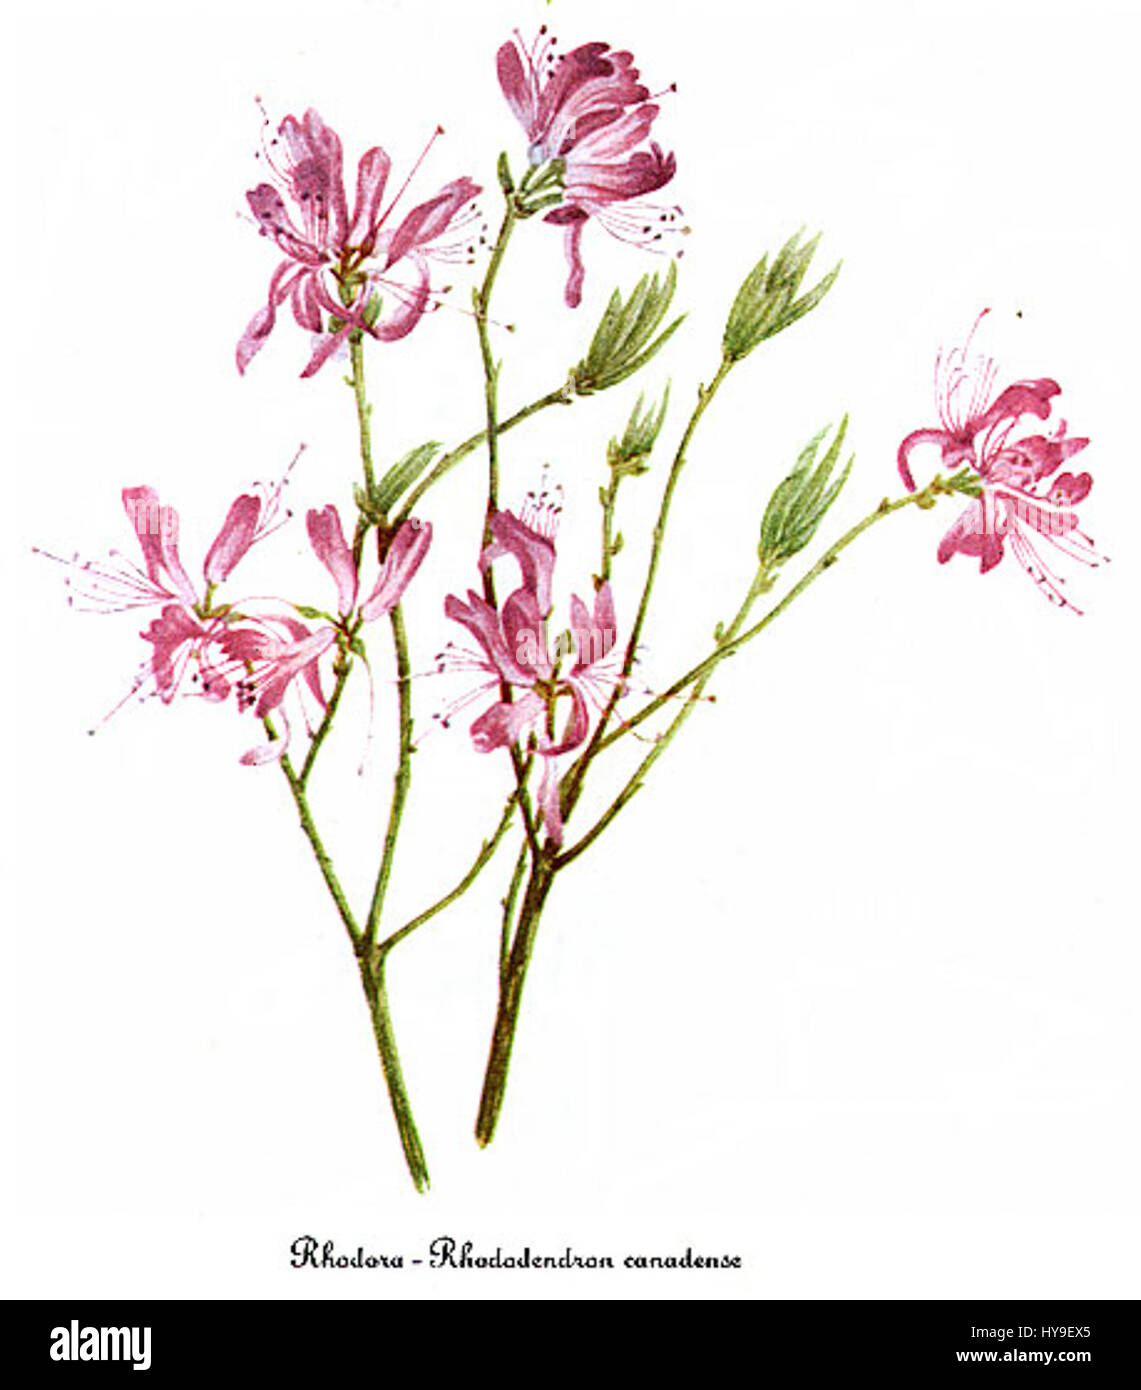 Rhododendron canadense, by Mary Vaux Walcott Stock Photo